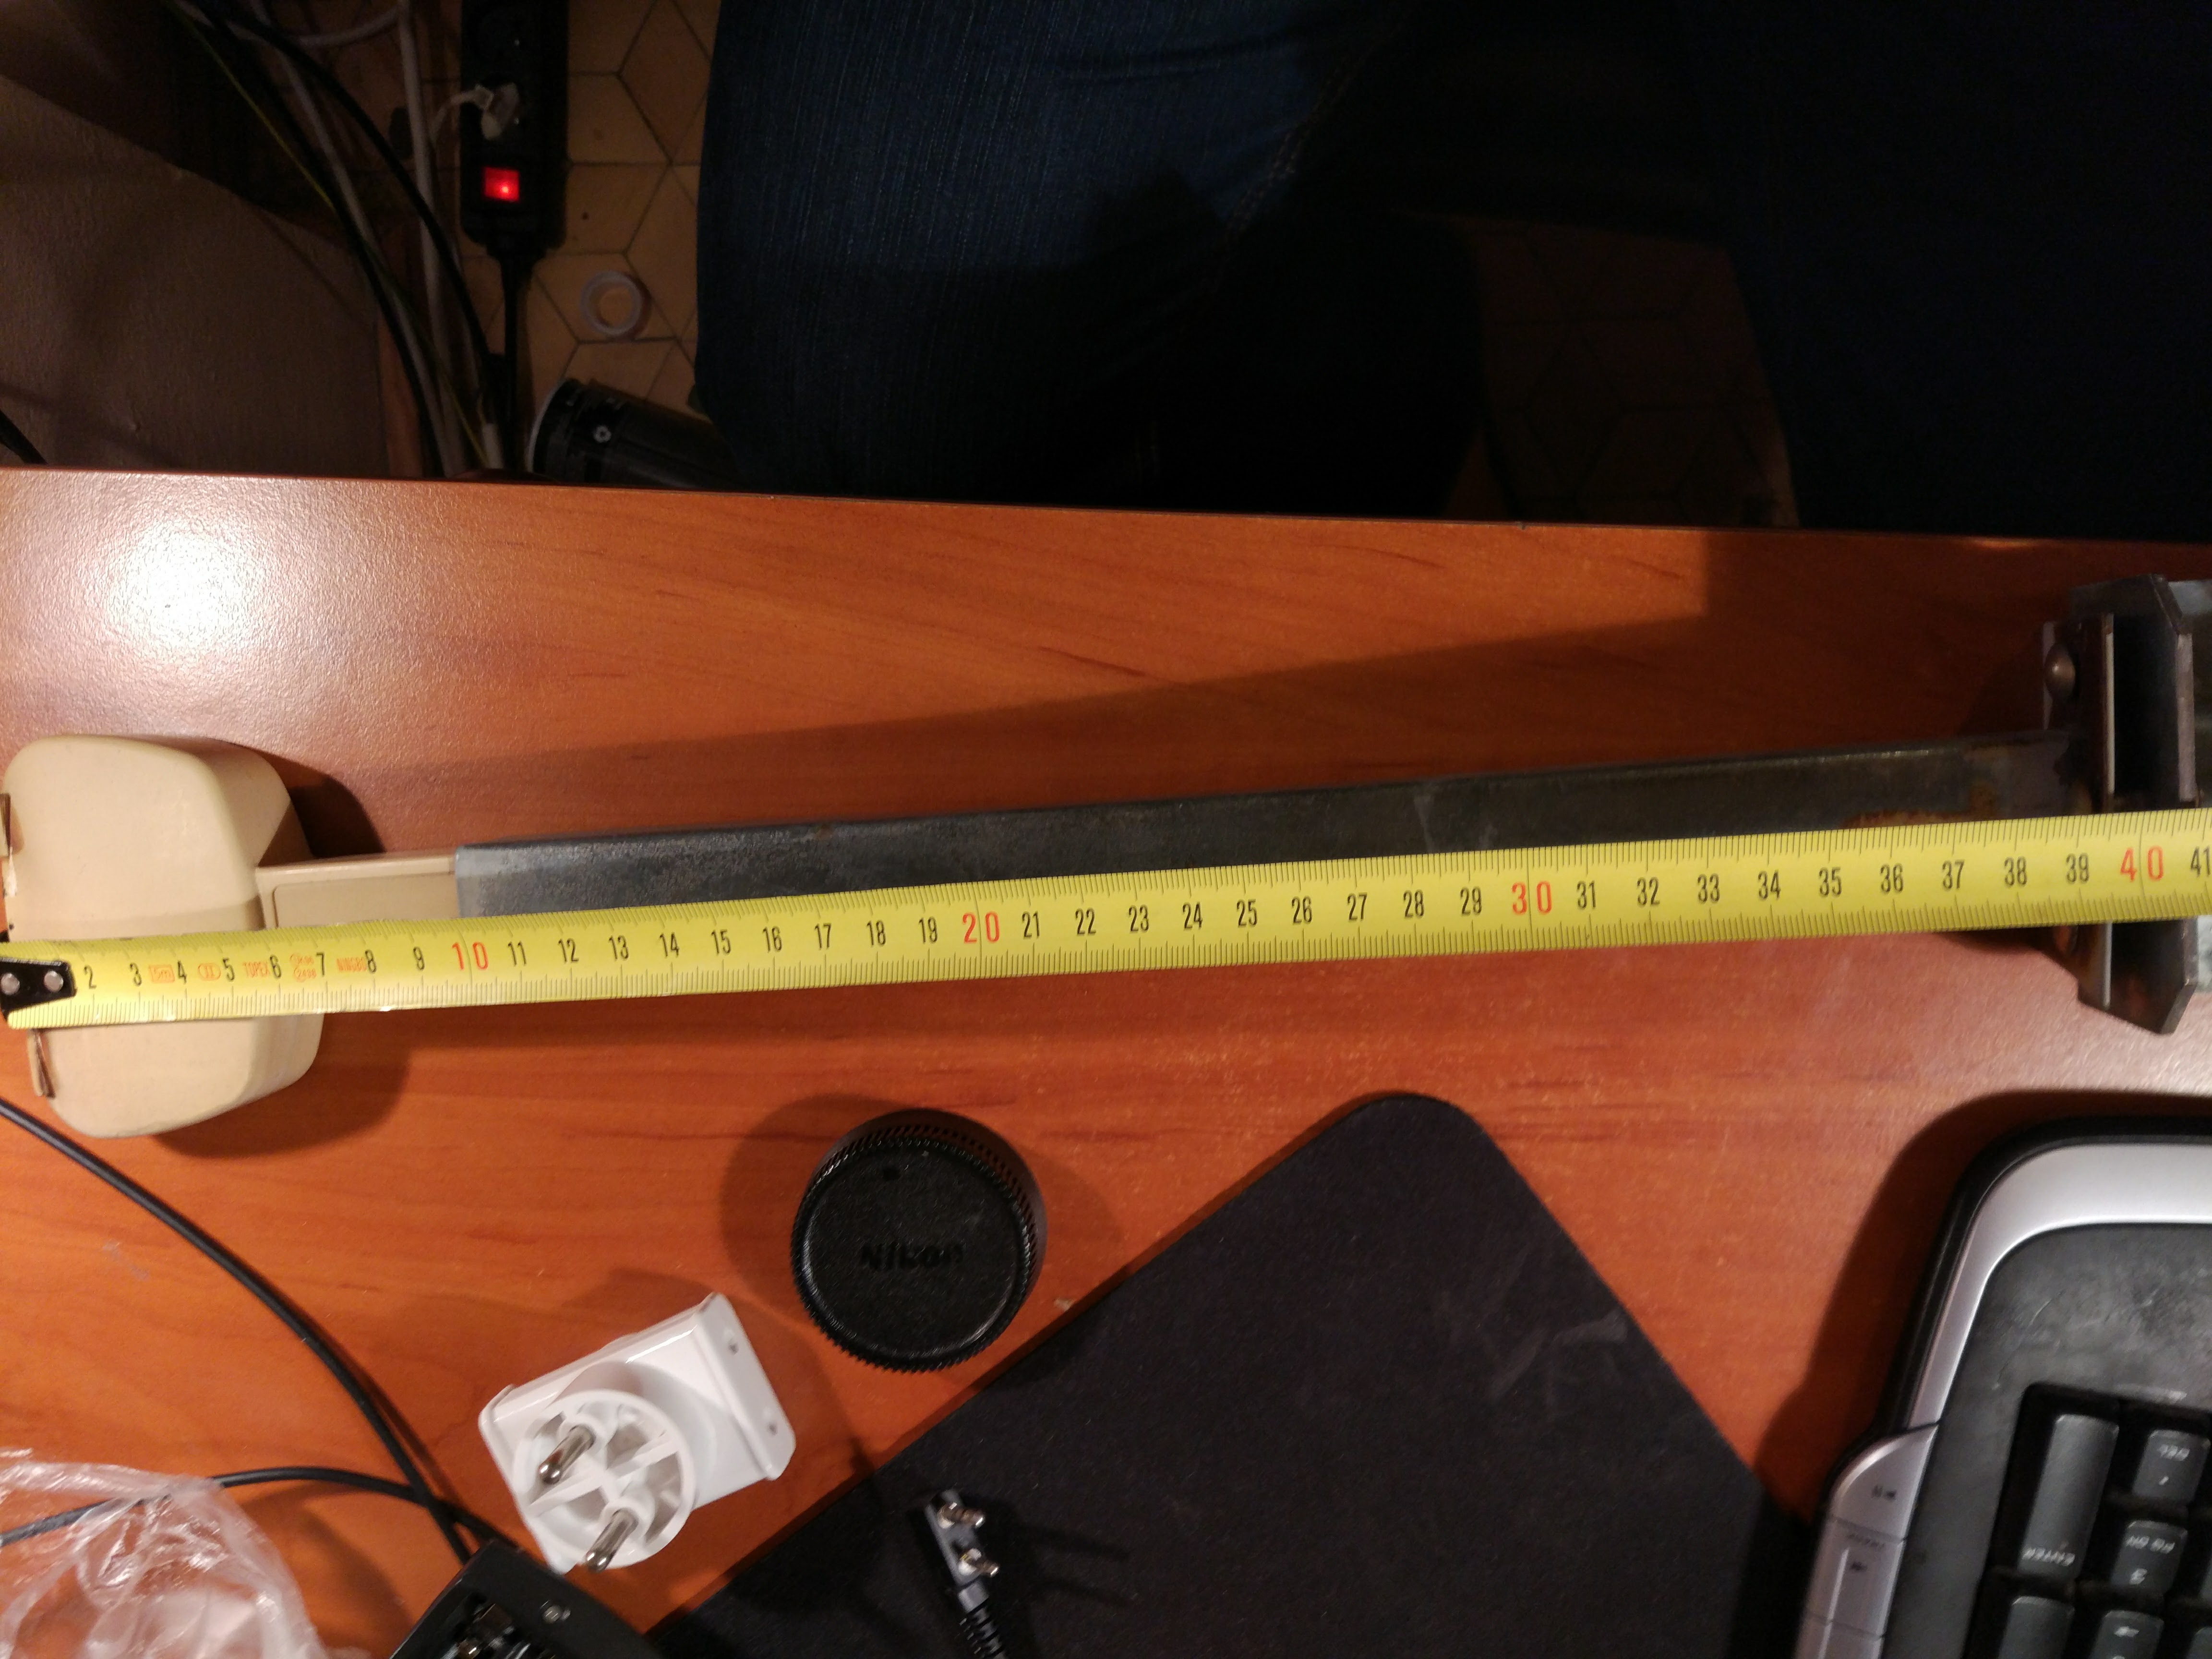 Moving from 13cm to 23cm